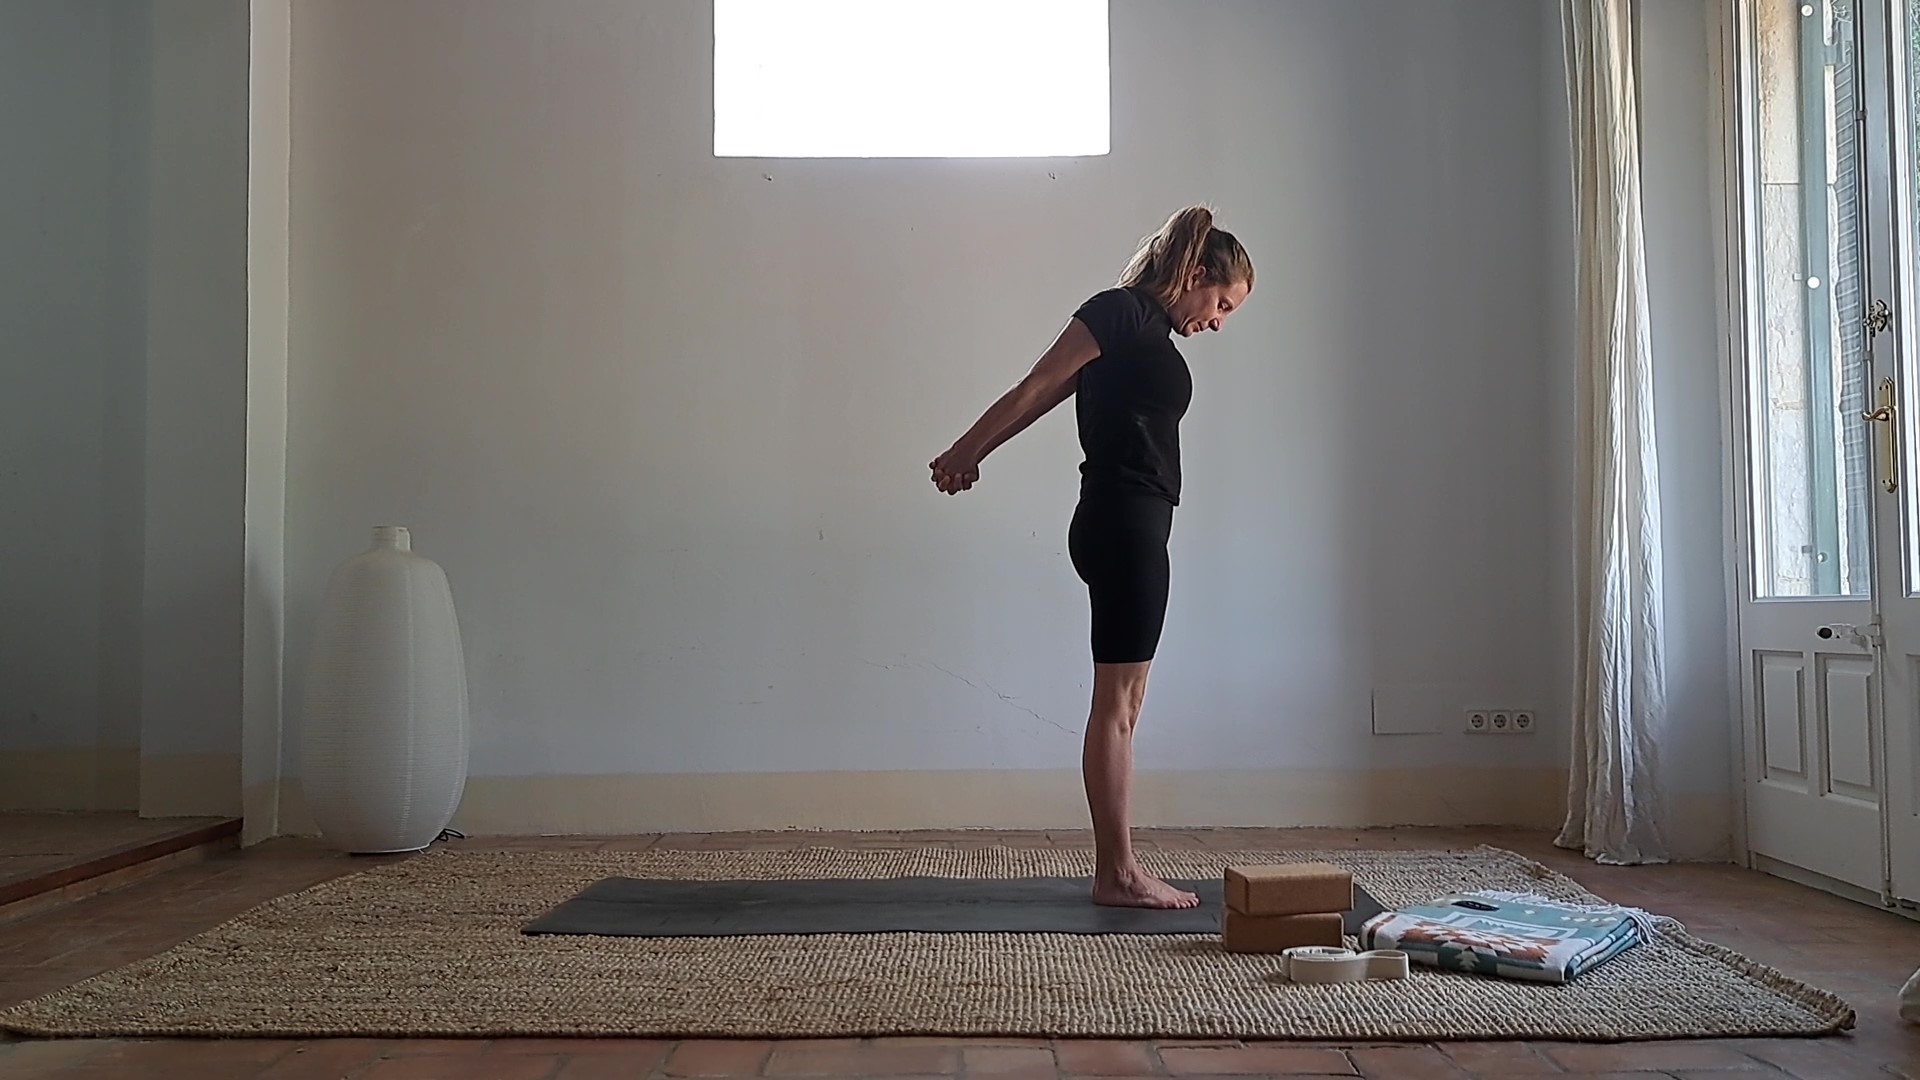 Iyengar Yoga Sequence of Poses For Practice at Home | Yoga Selection